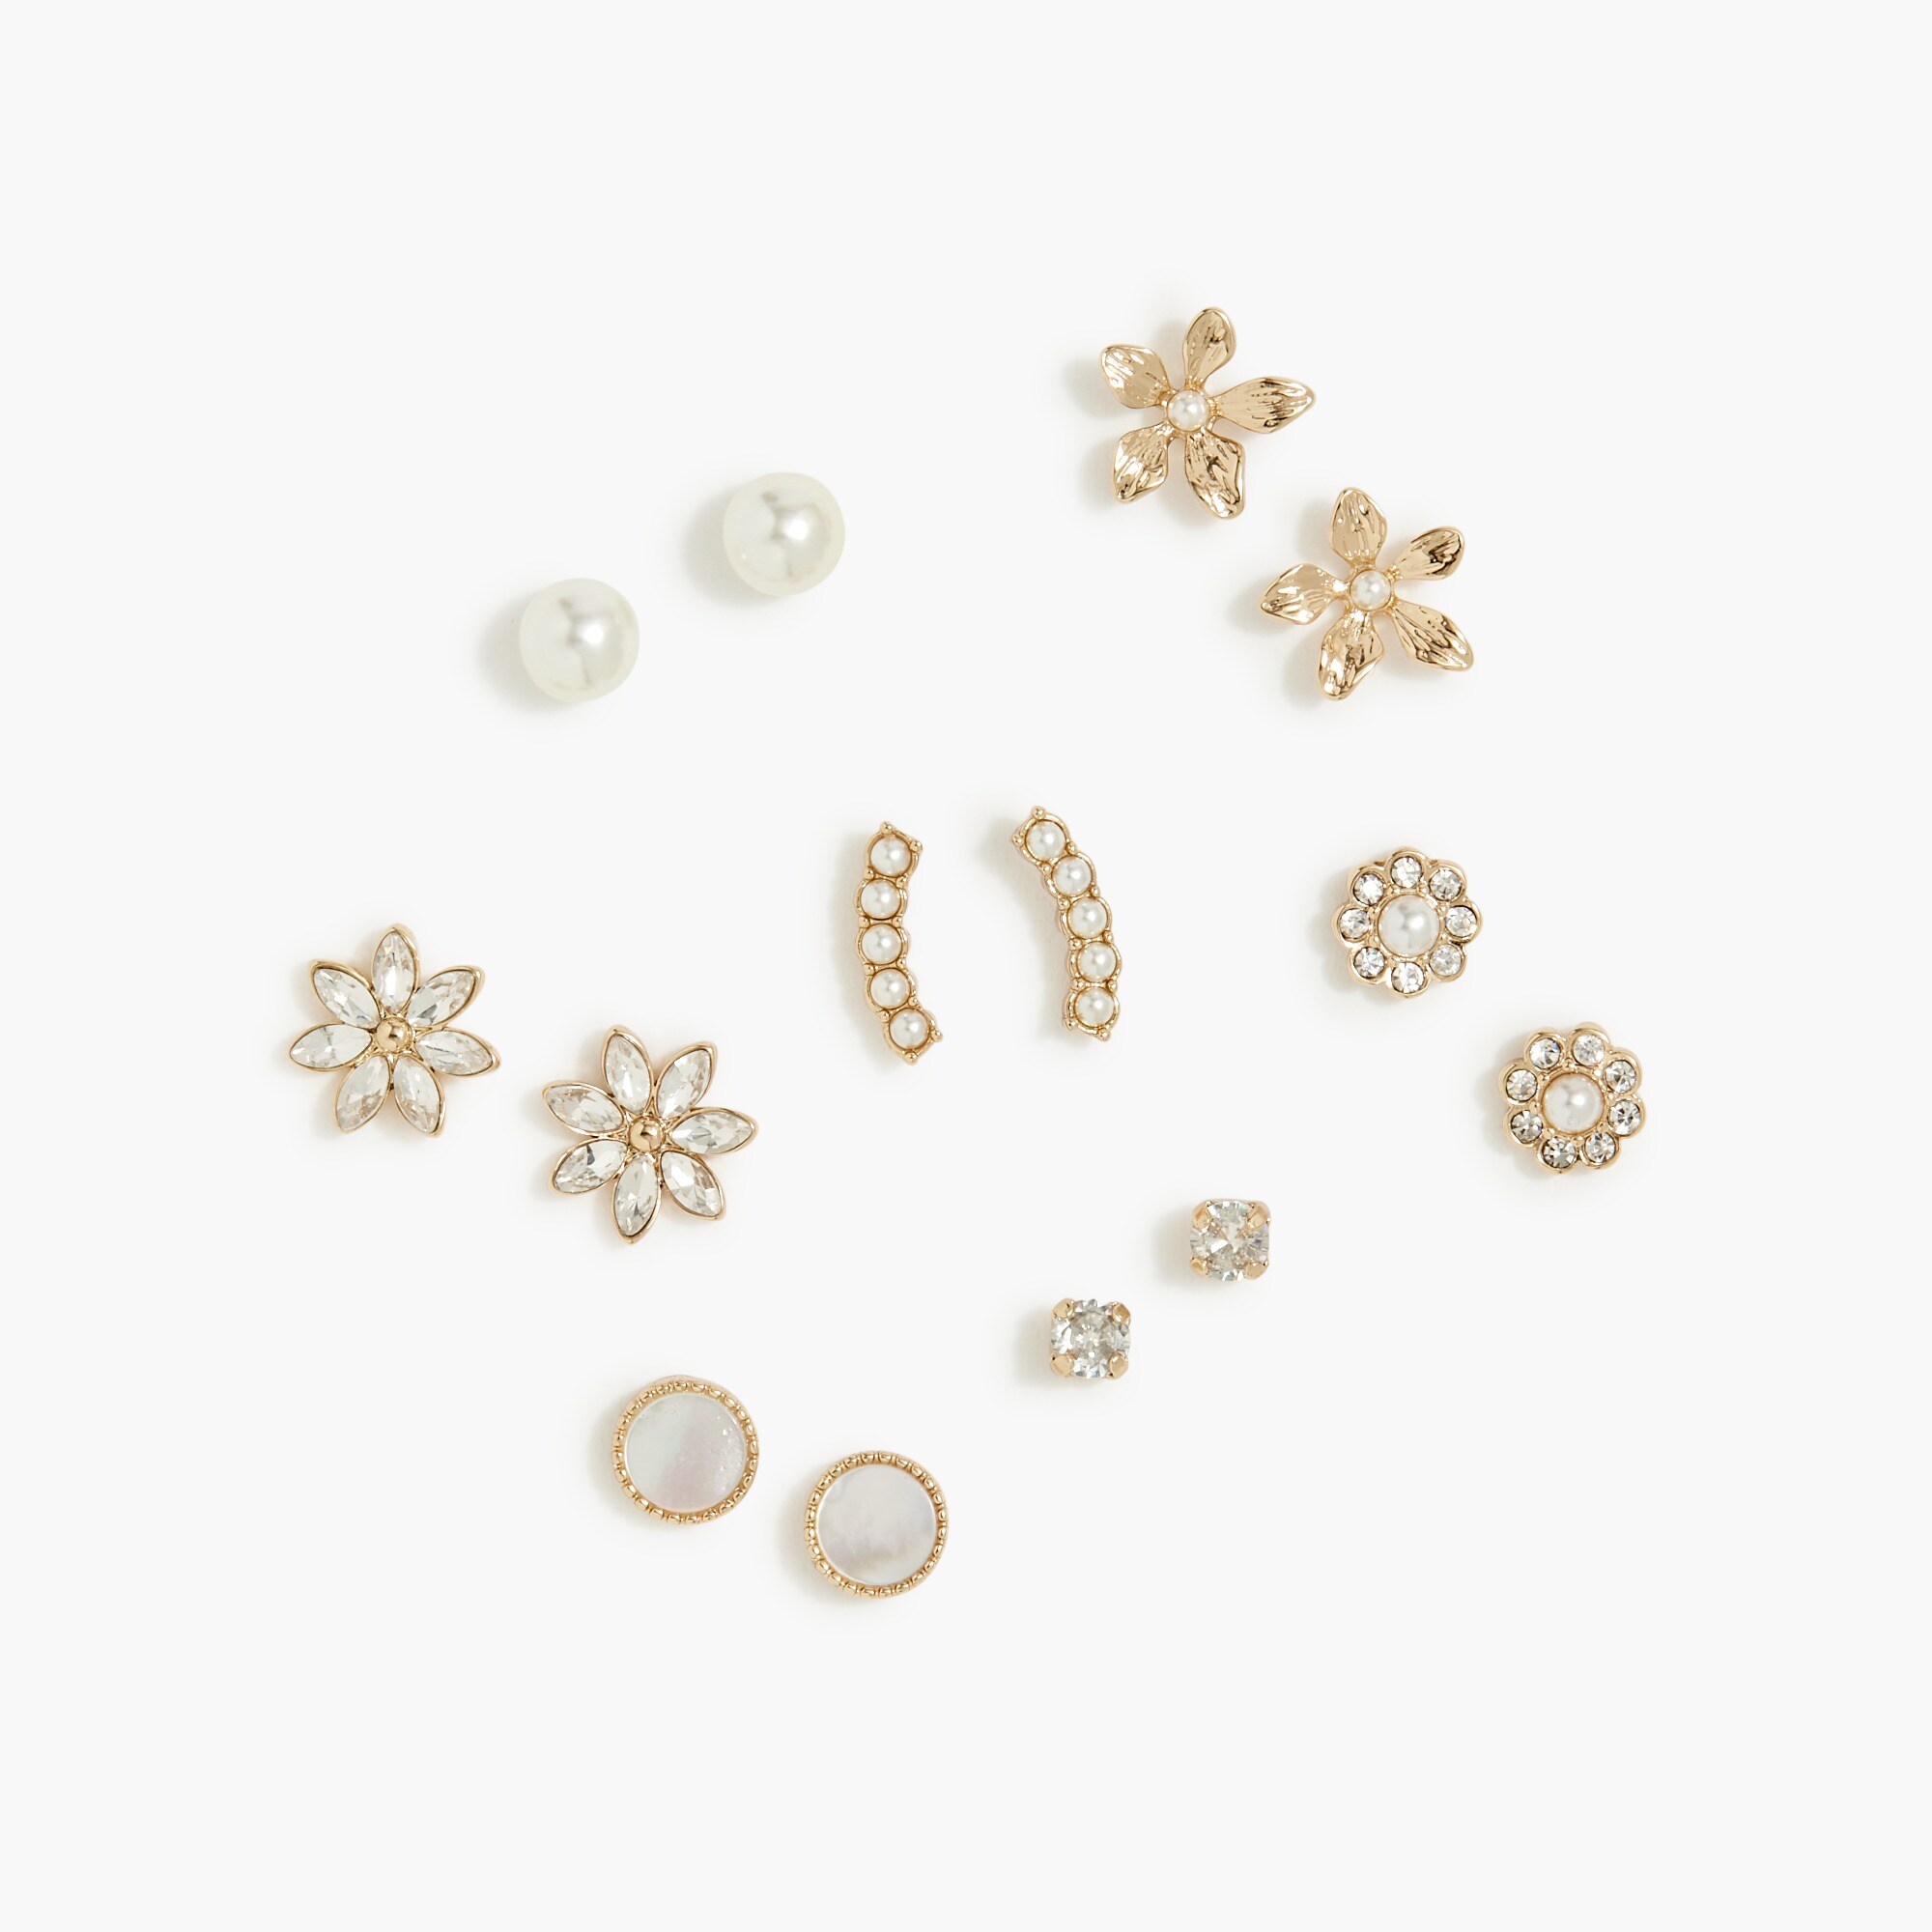  Gold and pearl flower stud earrings set-of-seven